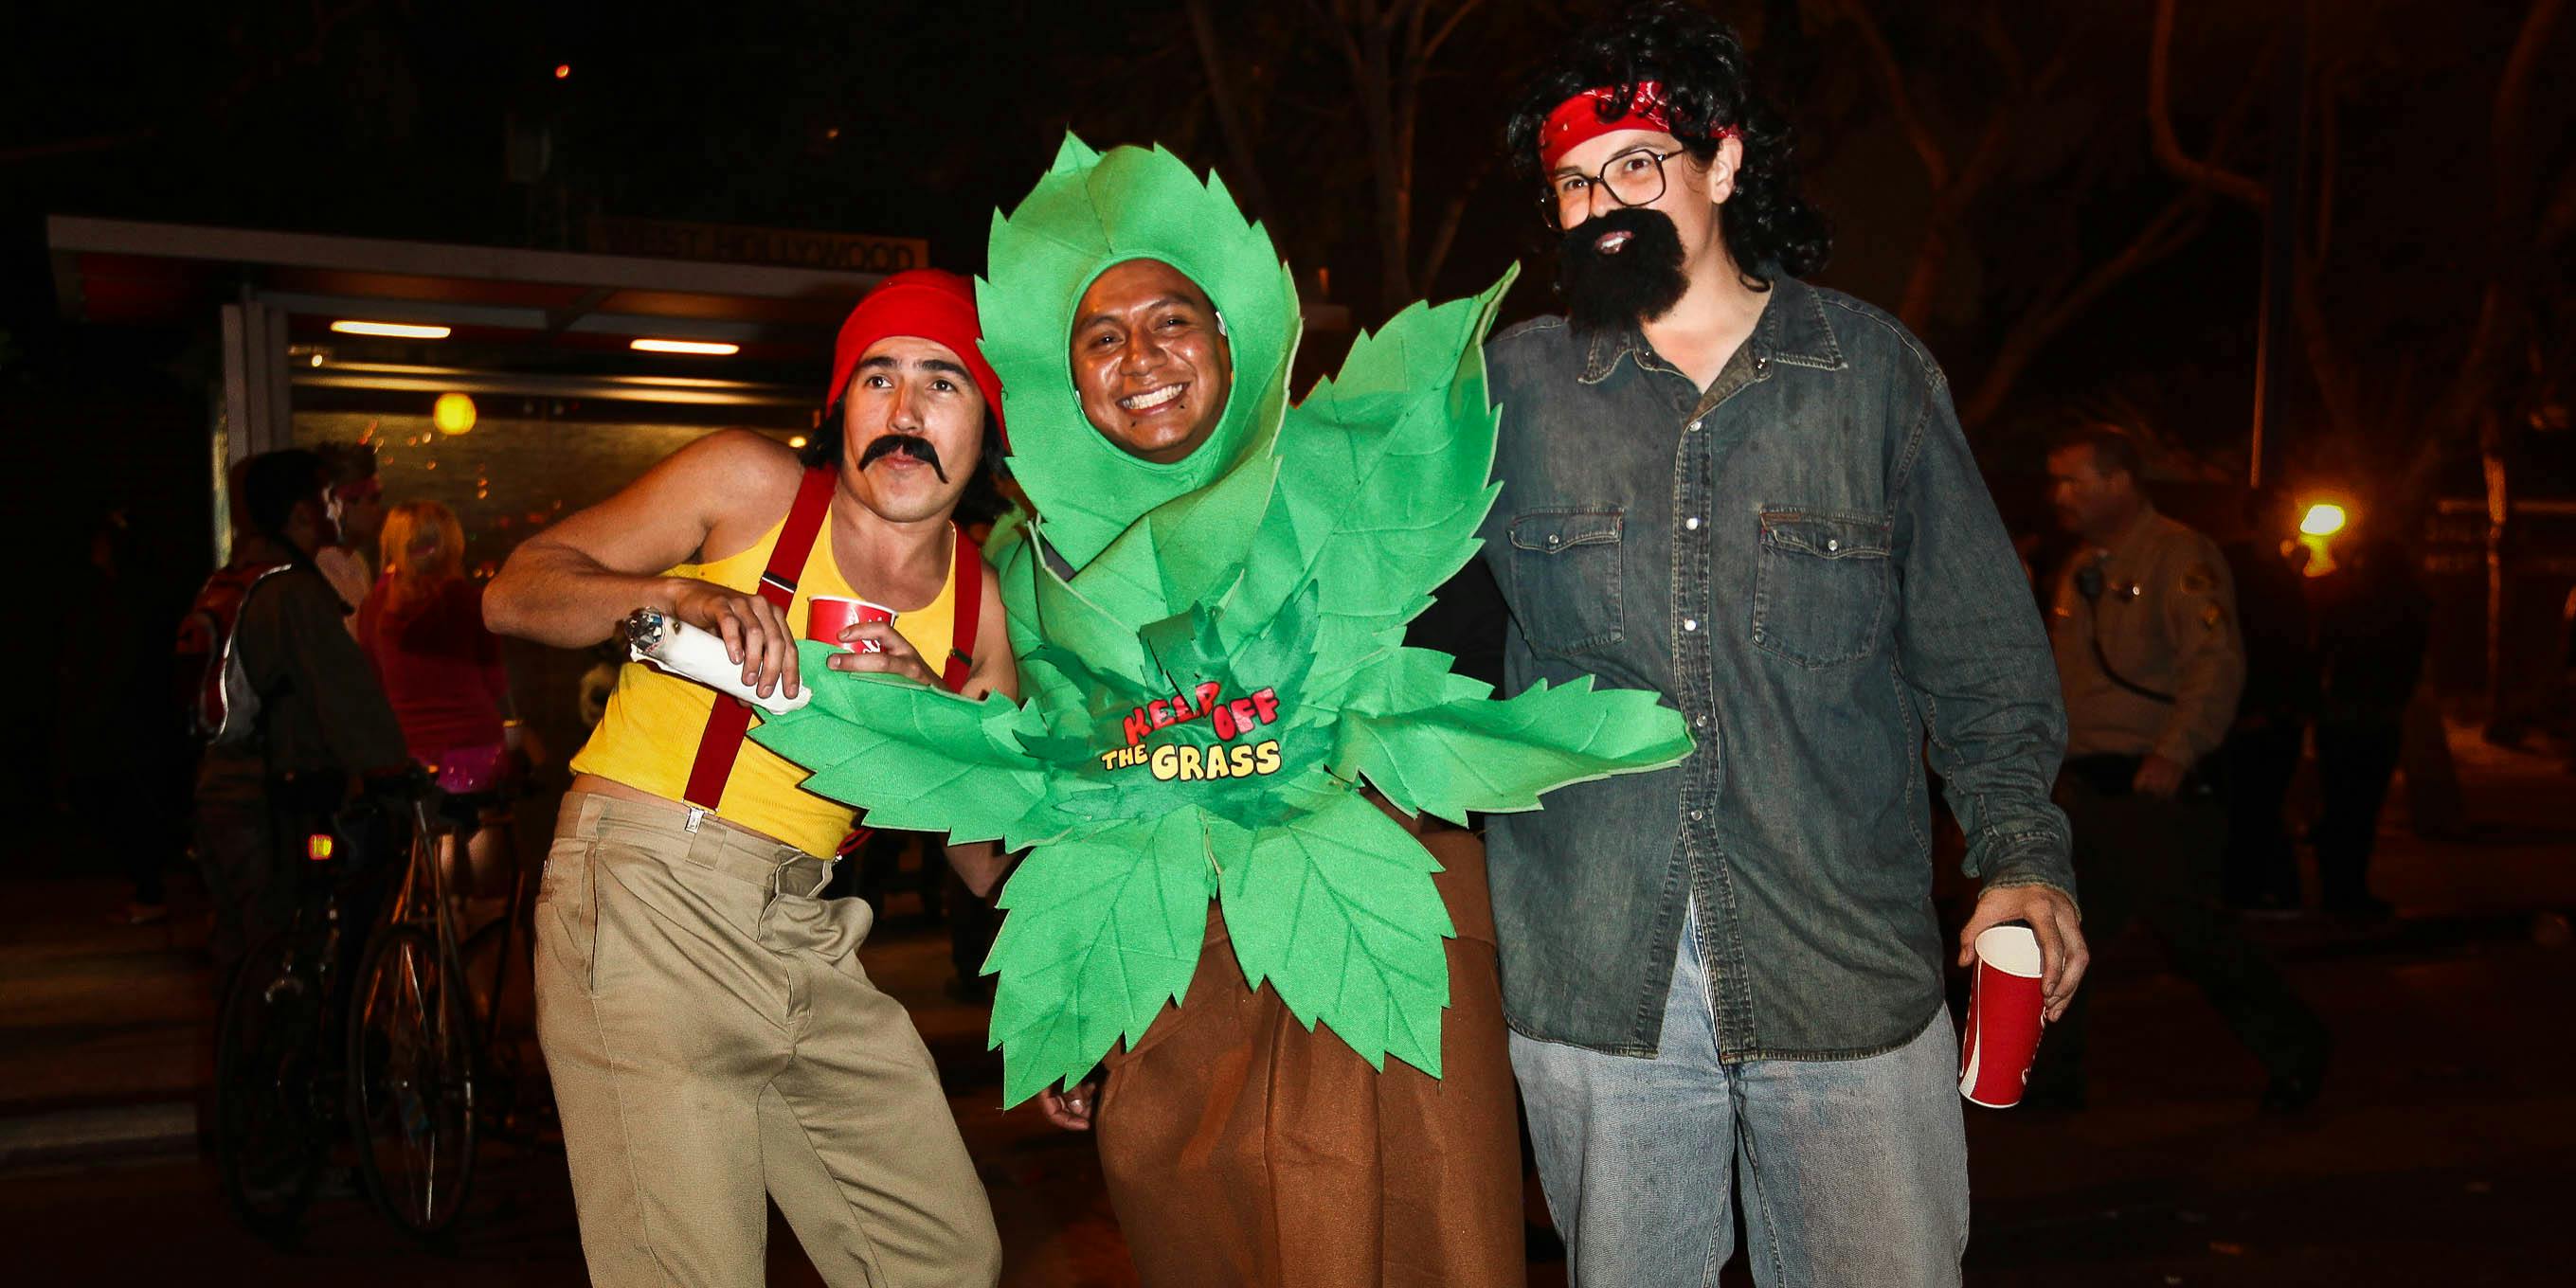 20 Easy and Hilarious Weed Halloween Costume Ideas image image